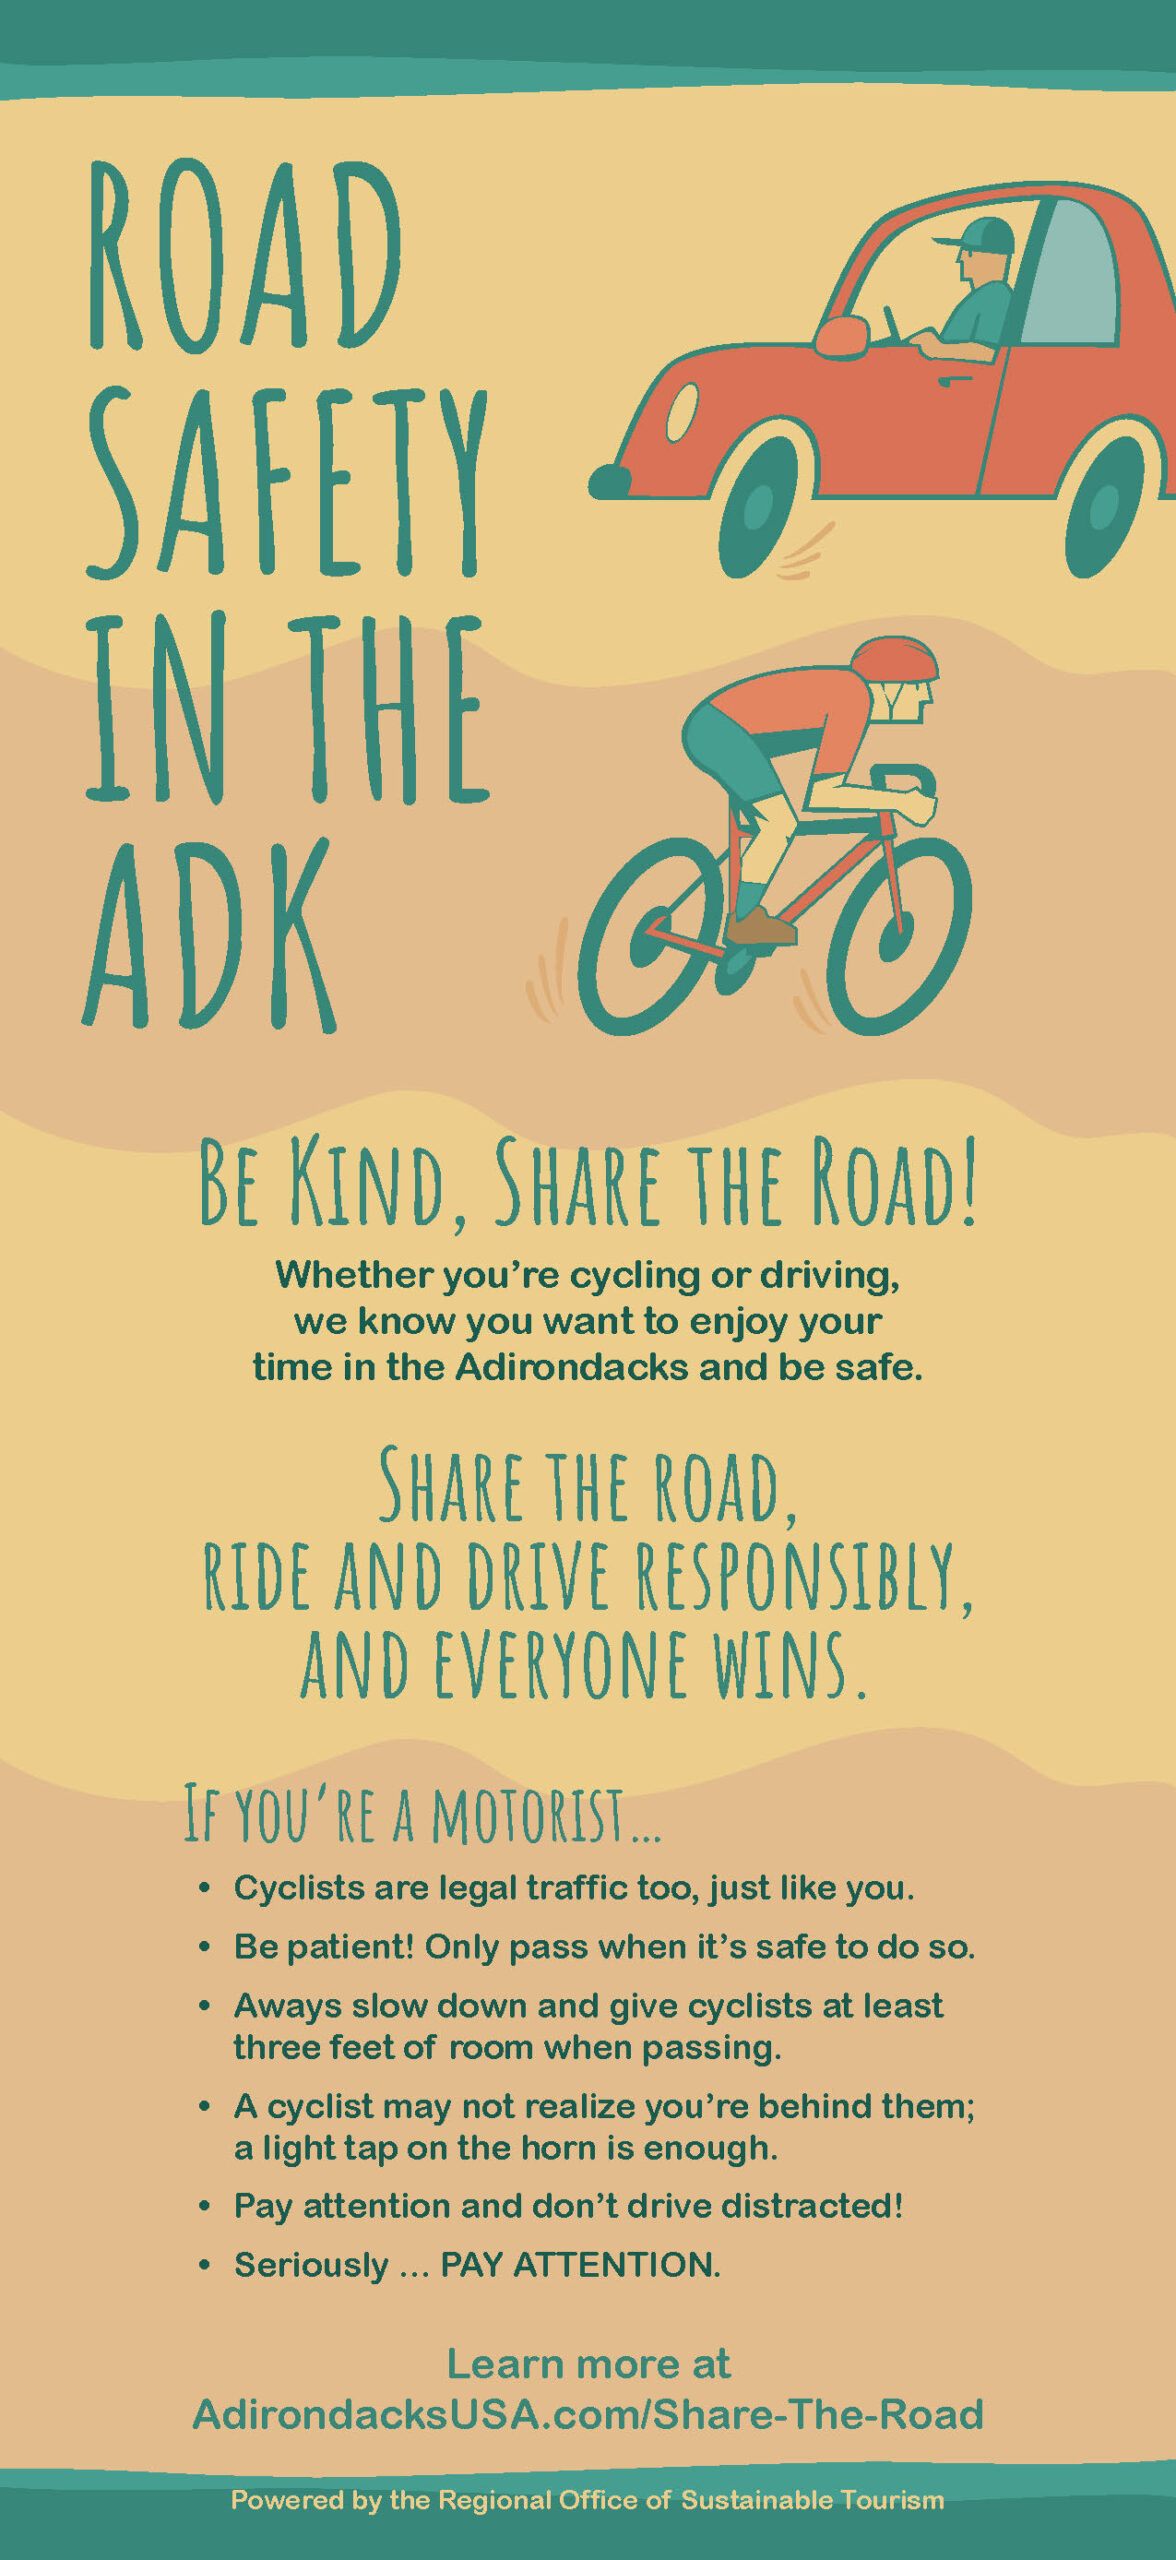 Share the road rules if you are a motorist